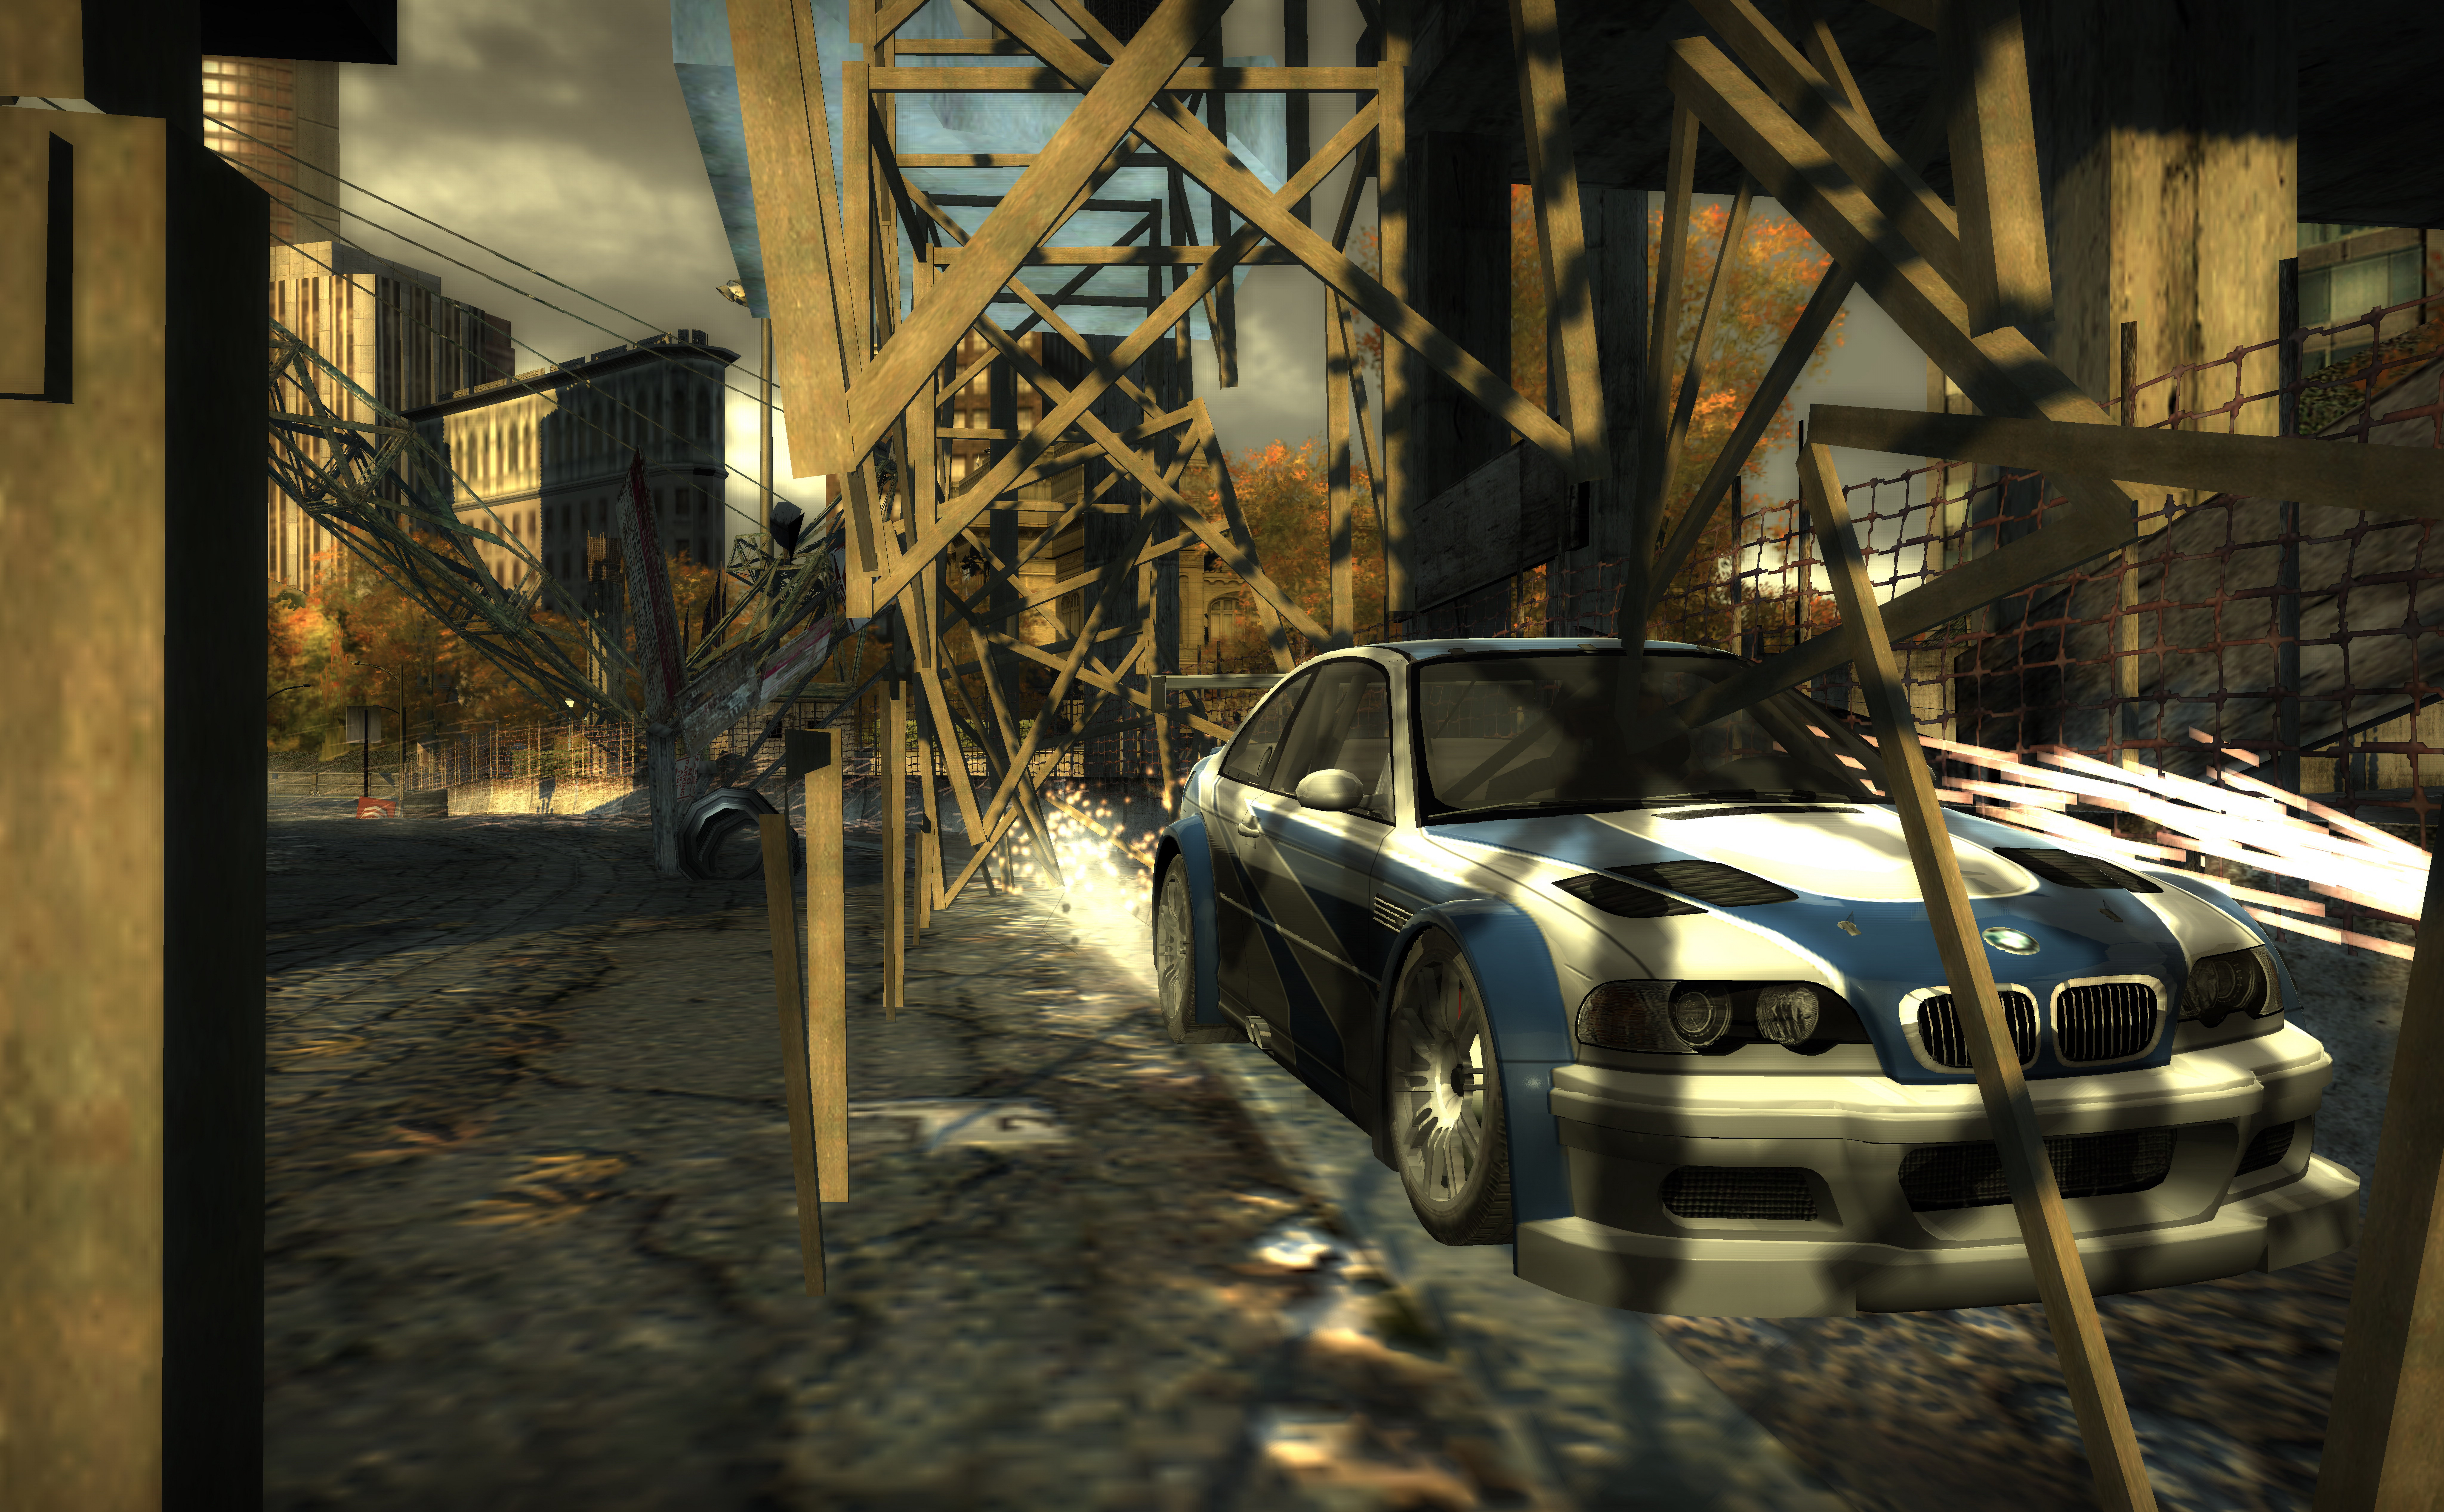 Most wanted hq. NFS most wanted 2005. Недфорспид most wanted 2005. Need for Speed мост вантед. Нфс МВ 2006.